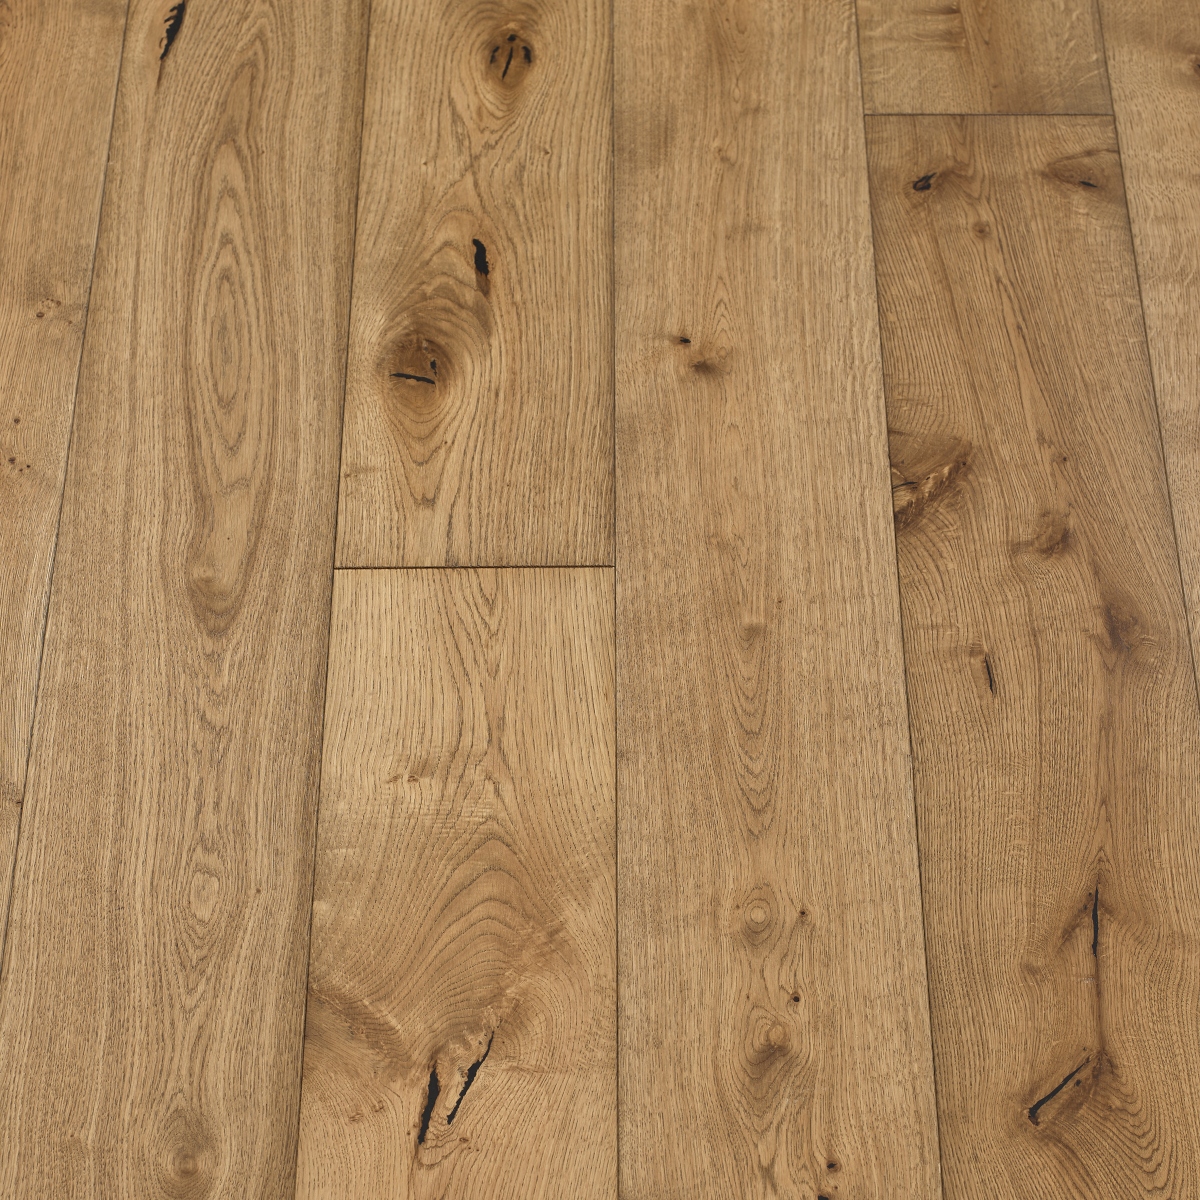 Classic Saffron Woodflooring - image showcasing a vibrant saffron-coloured woodflooring with a bold and energetic vibe.